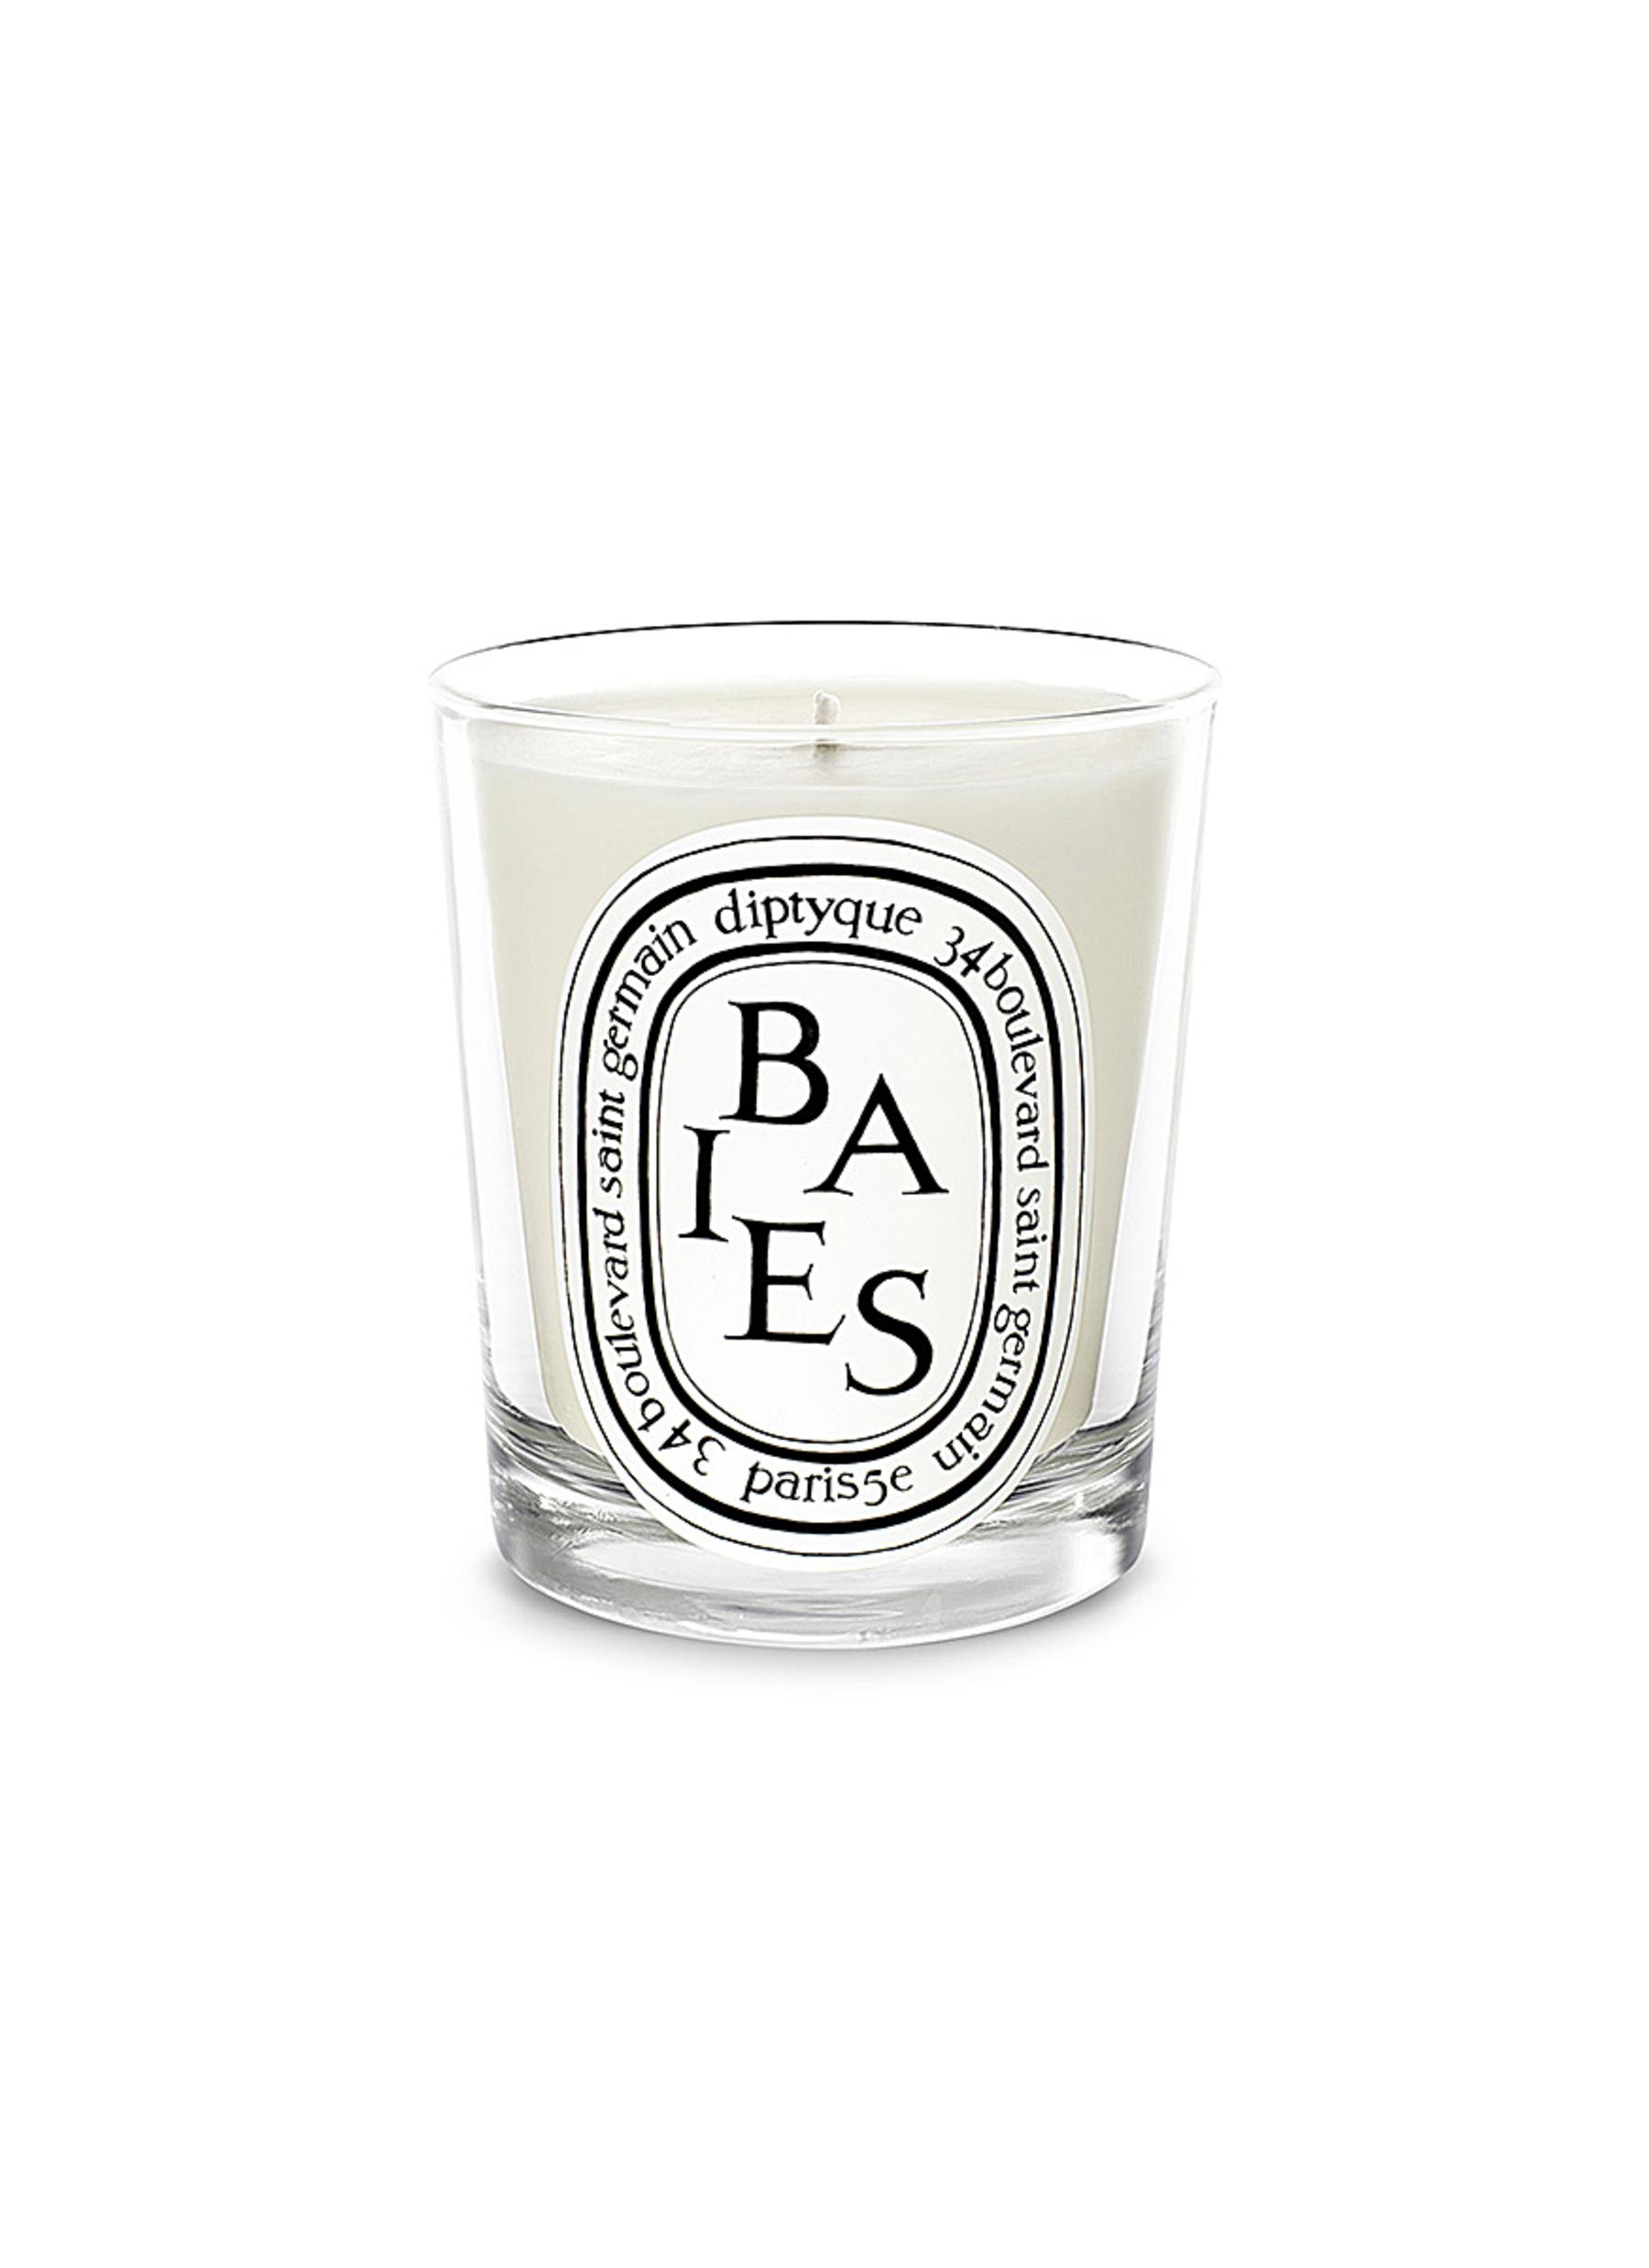 DIPTYQUE BAIES SCENTED CANDLE 190G